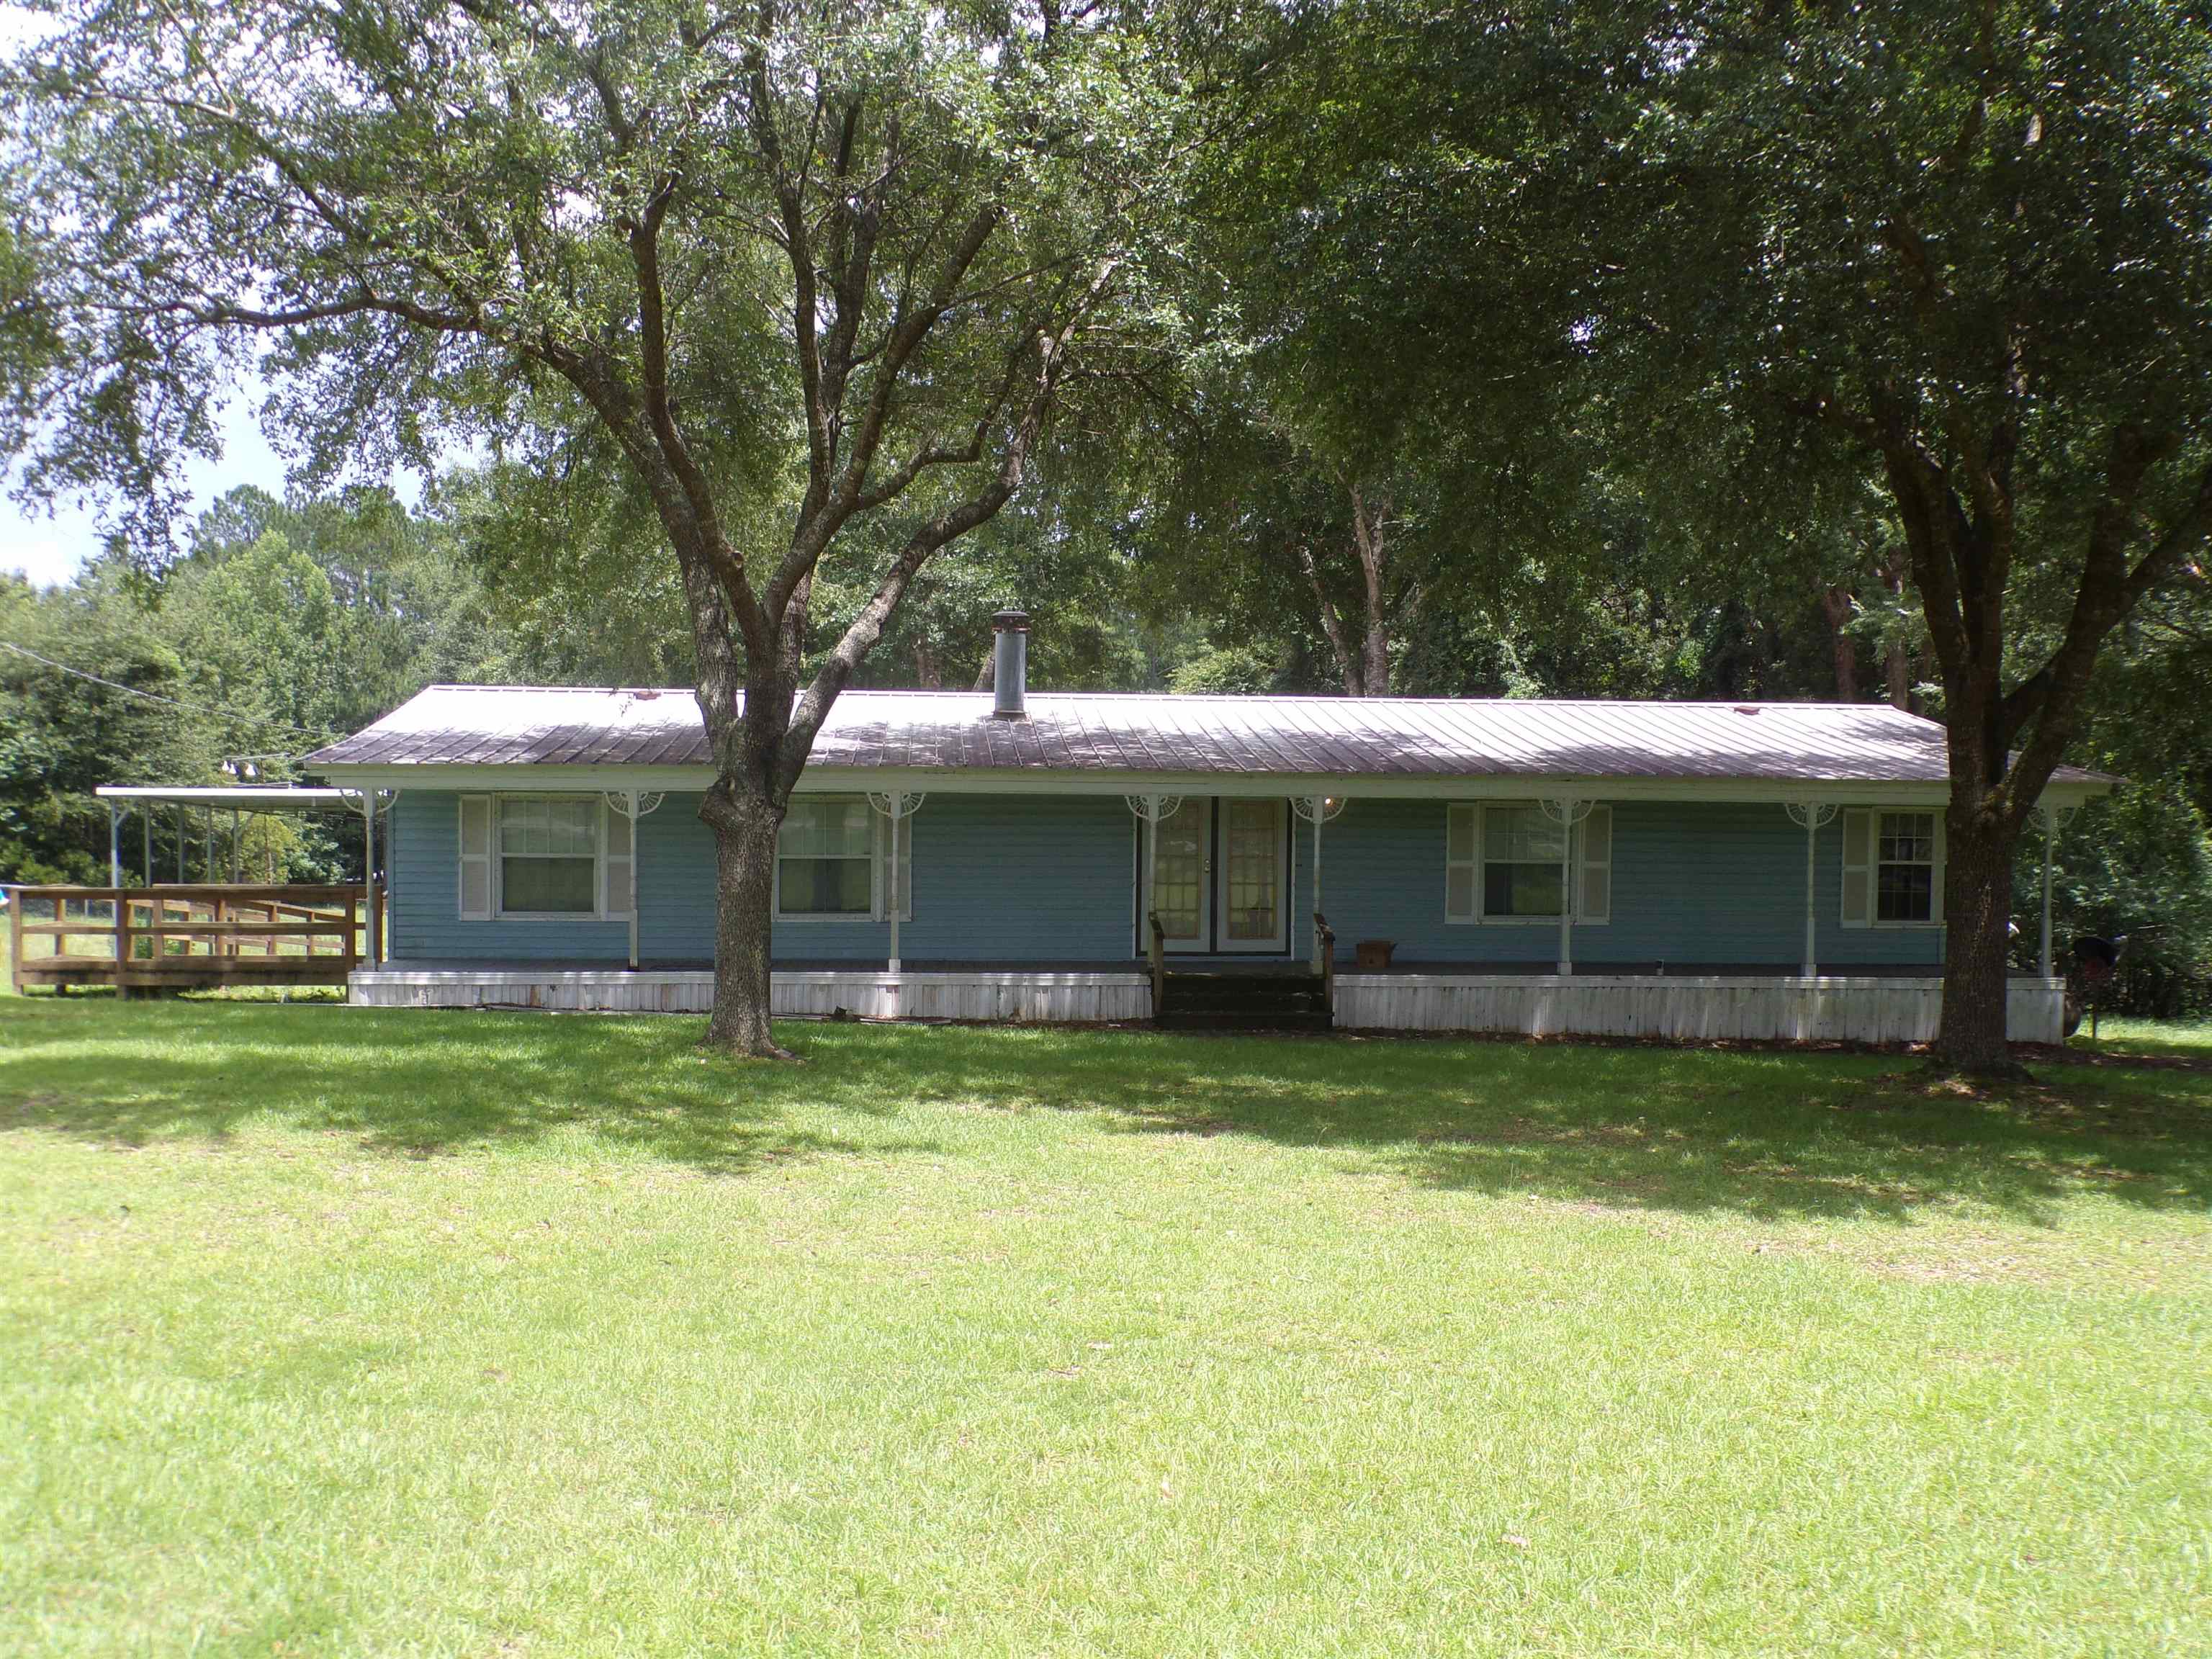 2+ acres in quiet and peaceful Havana, FL.  This 3 bedroom, 2 bath double wide mobile home is set up in Scott Plantation.  The roof is approximately 8 years old, standing seam, large front and back porches and a wheel chair ramp, too.  There is a 36x36 concreted shop with walk in cooler and smoke house.  The kitchen has recently been updated with new cabinets and appliances.  Home could use a few cosmetic touches here and there but for the most part, its ready for the perfect homeowner!